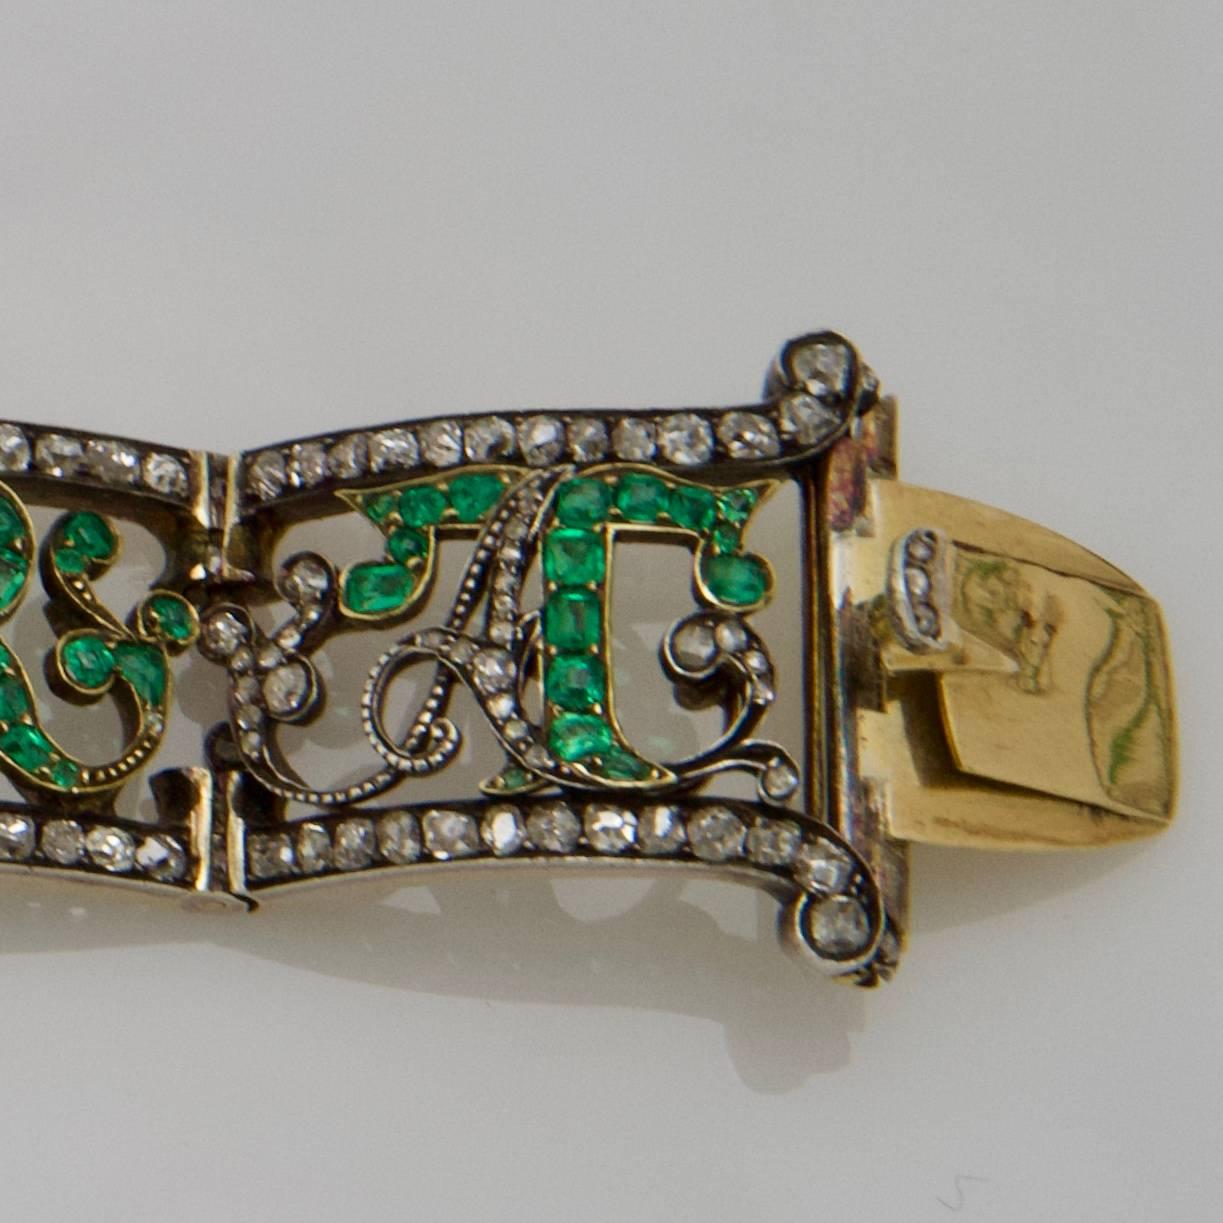 Mid-19th Century 19th Century of Saxony Historical and Royal Emeralds and Diamonds Bracelet 1853 For Sale